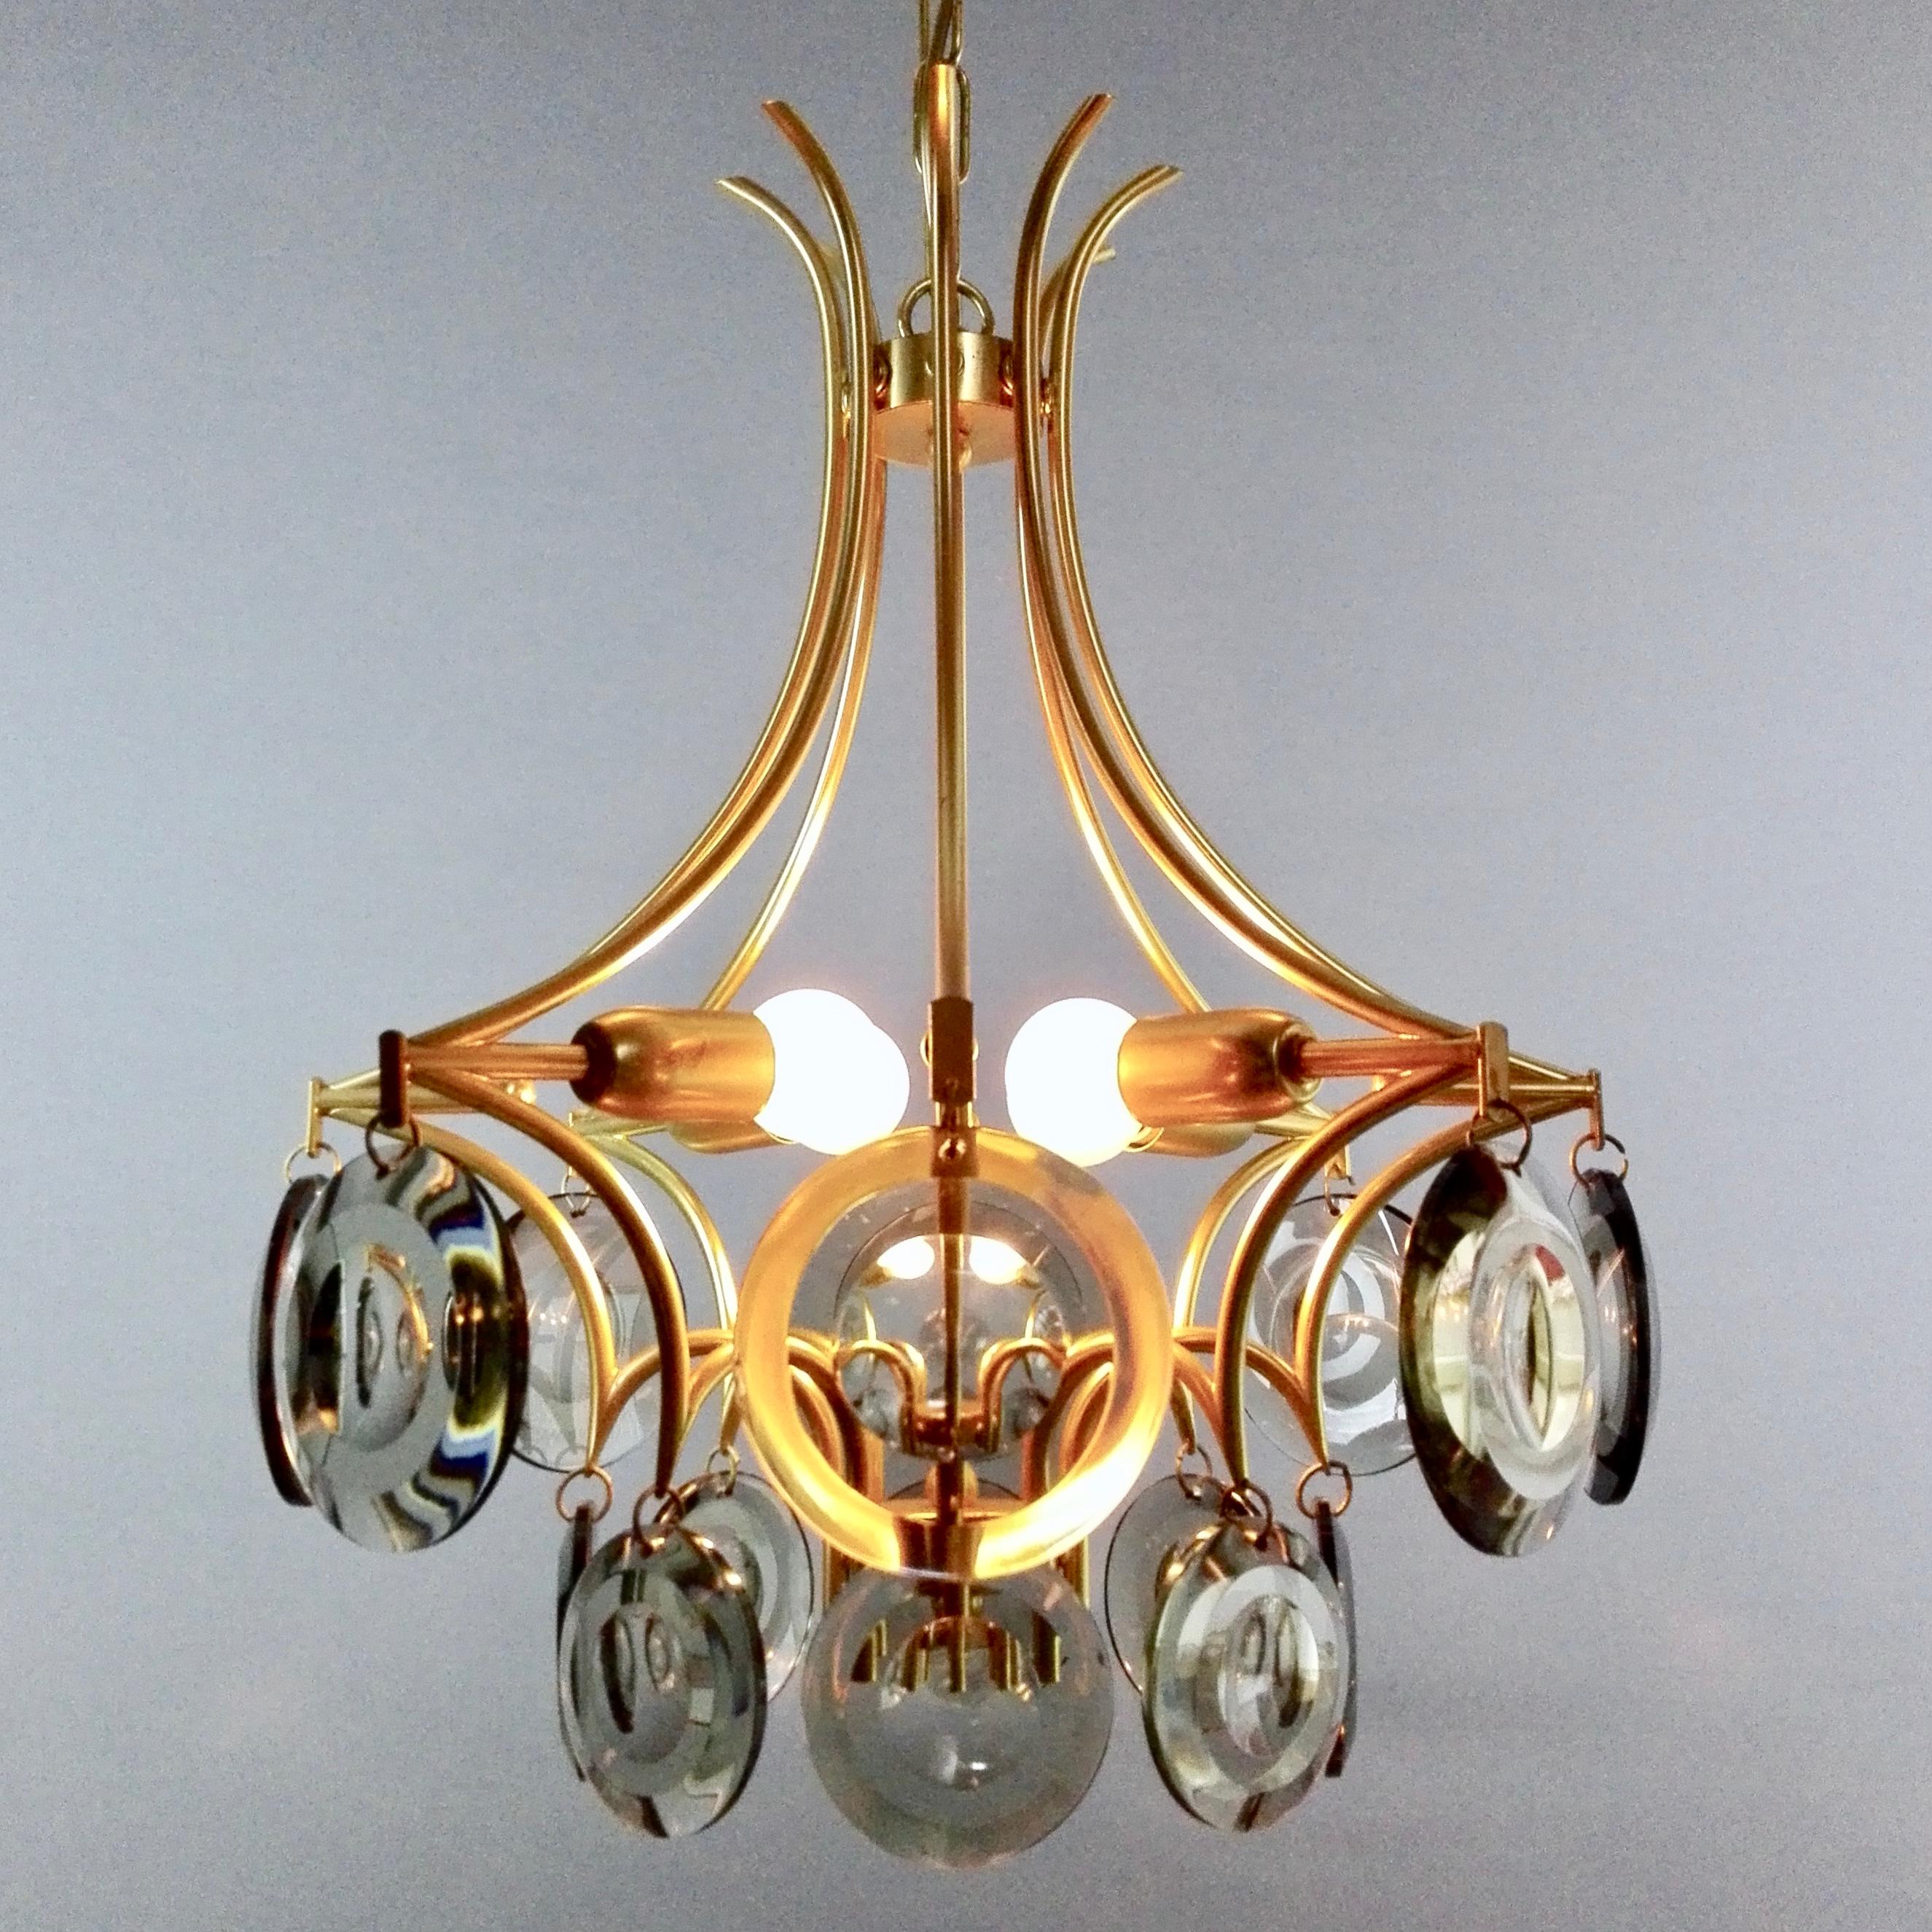 Very particular four-light Italian 1970s chandelier in the style of Vistosi. The fixture has a gilded metal structure composed of eight arms that descend widening from the top. 
Note the very creative way in which the lamp holders are alternately